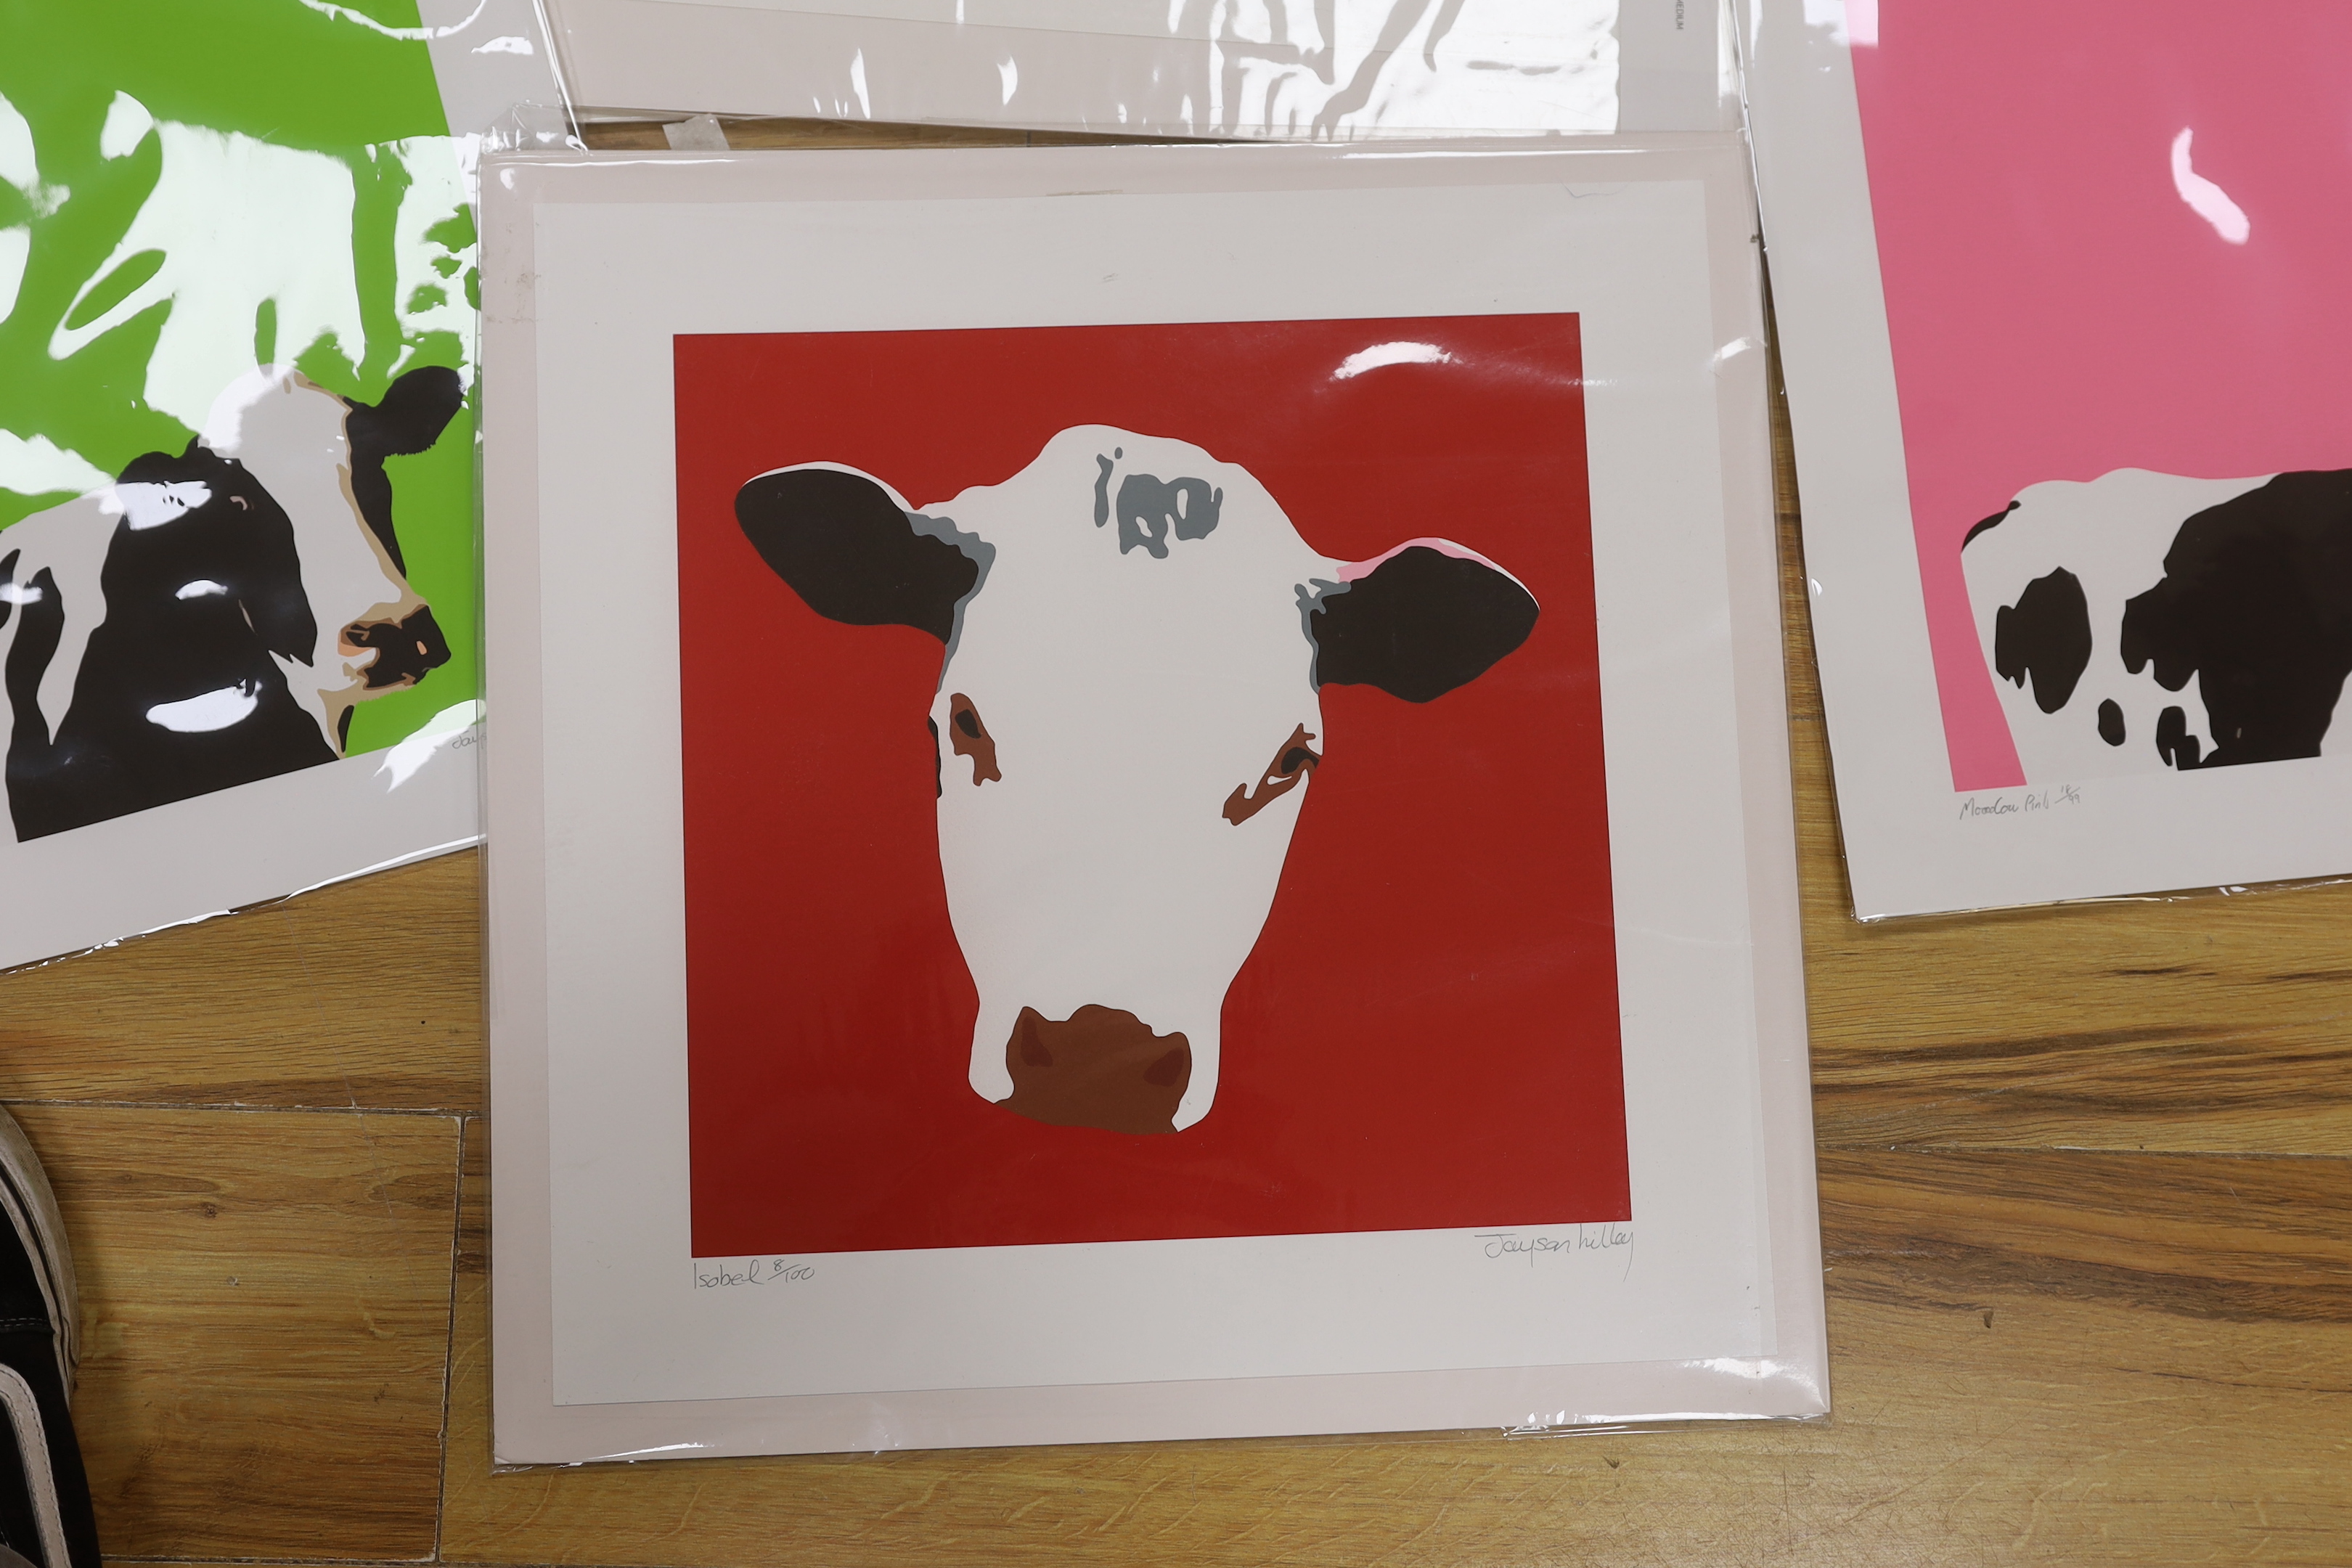 Jayson Lilley (b.1972), set of five contemporary colour screenprints, Cows including 'Mooocow Green' limited edition 59/99, and 'Isobel', limited edition 8/100, each signed in pencil, each 50 x 50cm, unframed